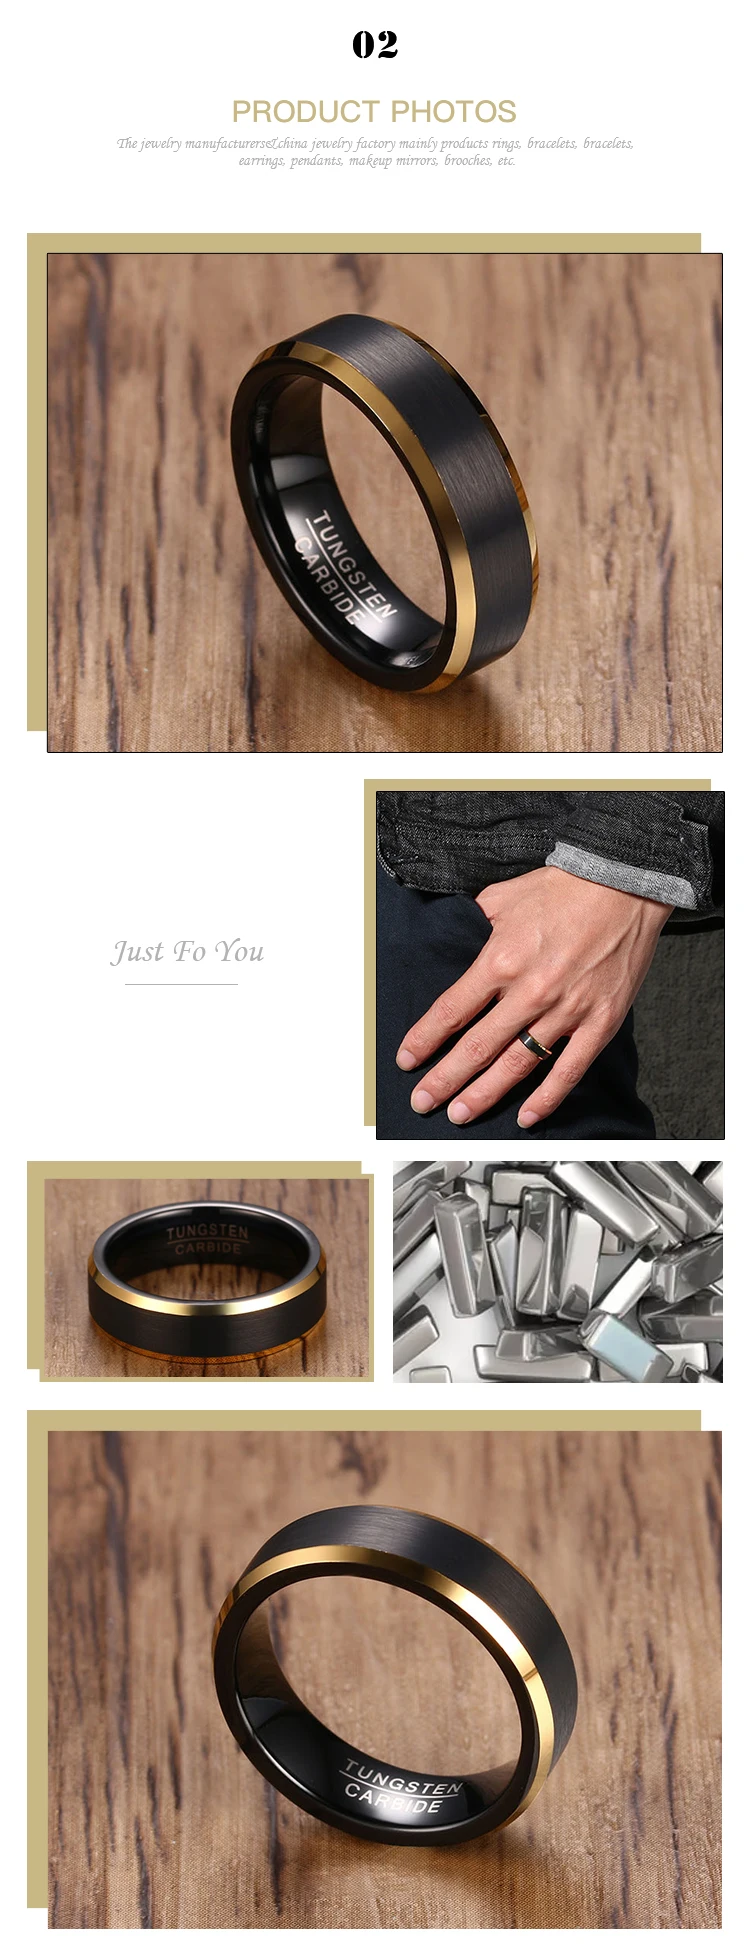 Hot Selling Wholesale customizable Electroplating black gold brushed tungsten steel men's ring TCR-074